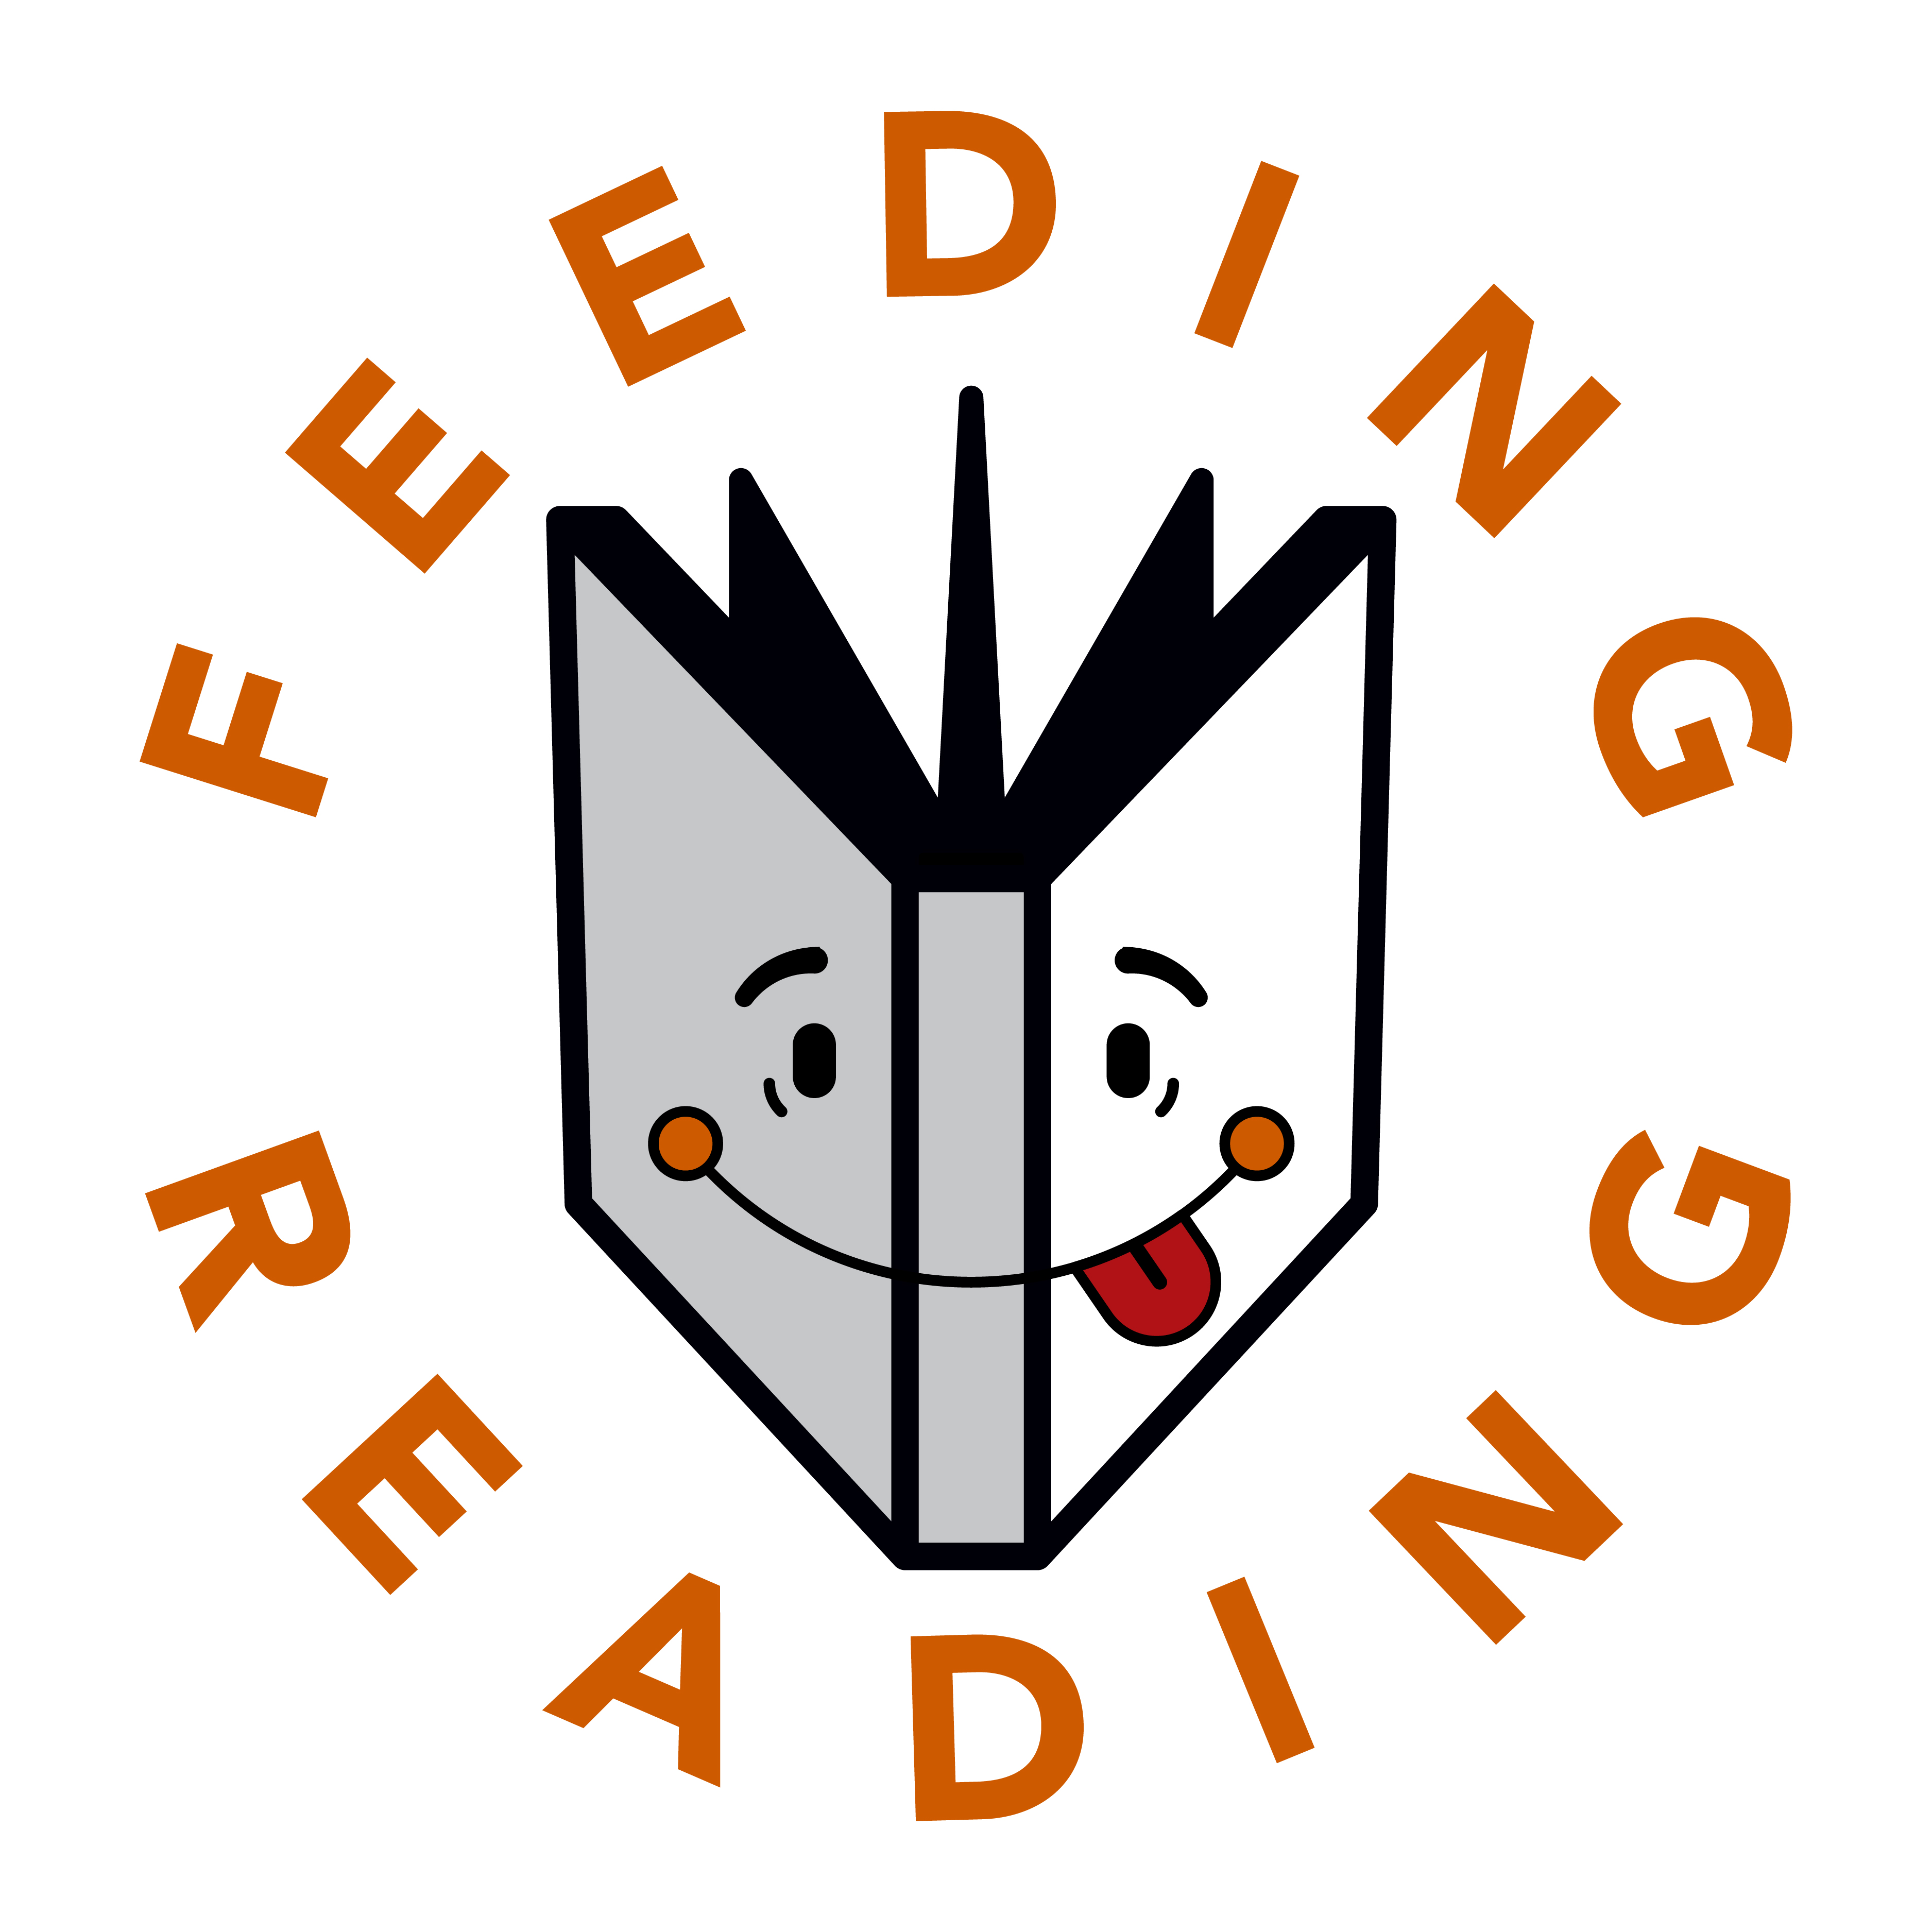 Feeding Reading logo design by logo designer Pyrographx for your inspiration and for the worlds largest logo competition